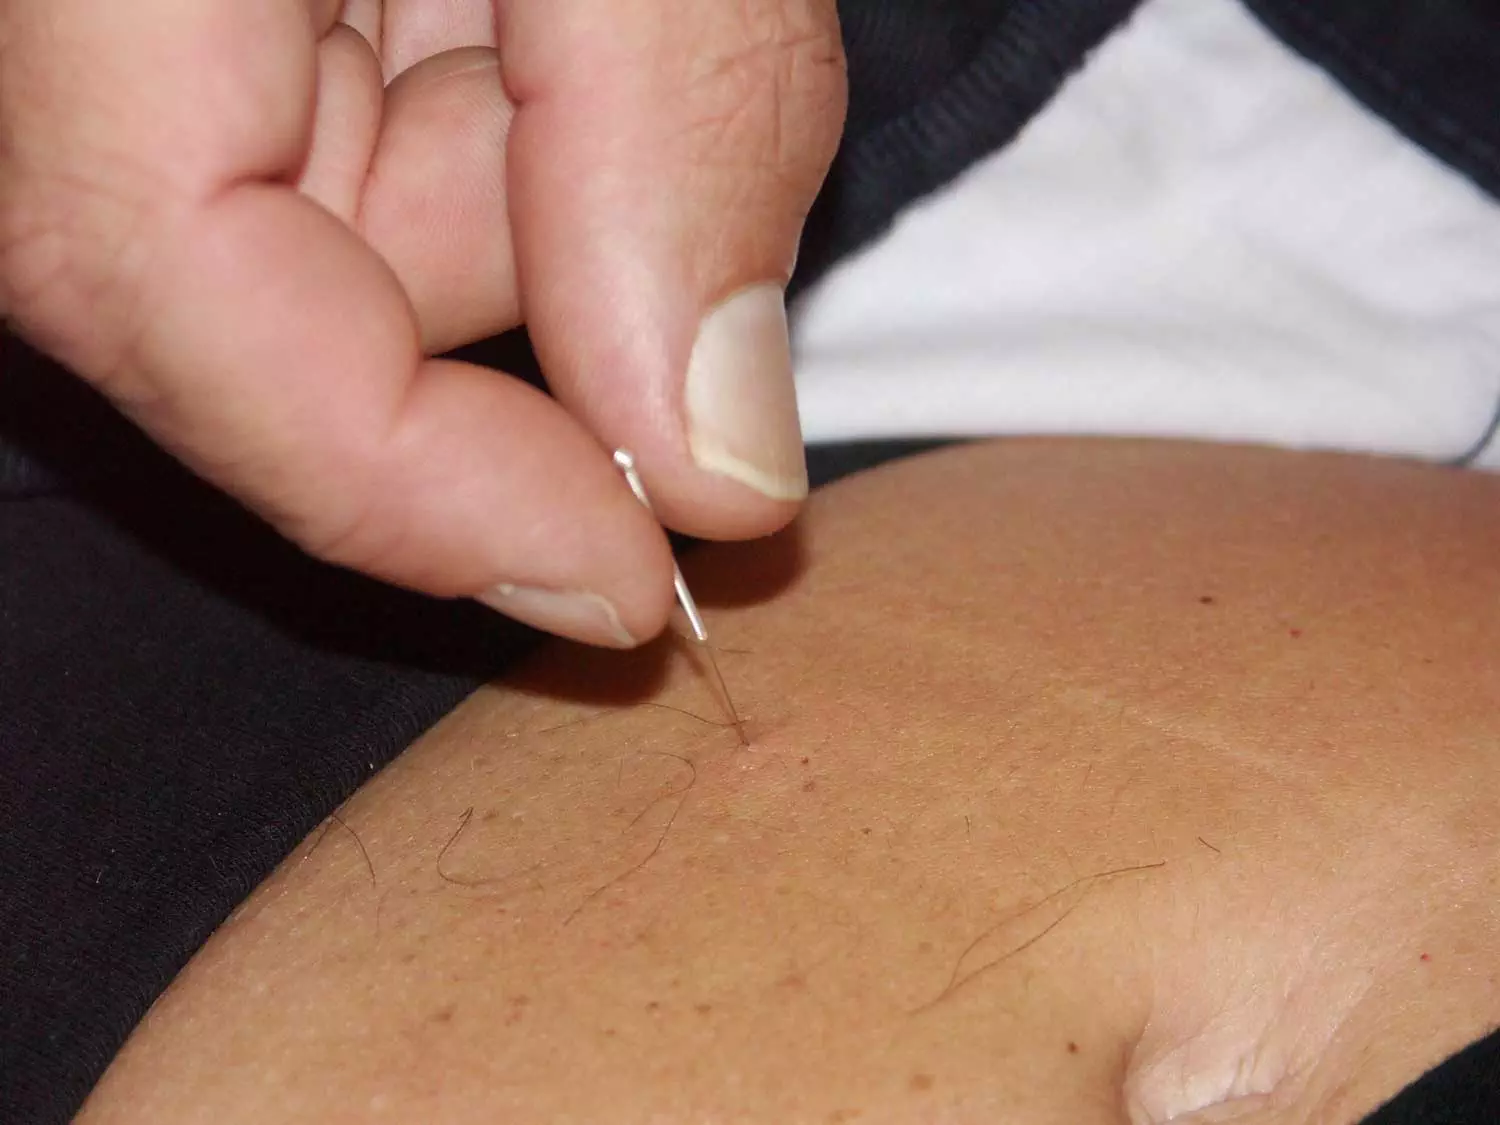 TCM Acupuncture in tummy